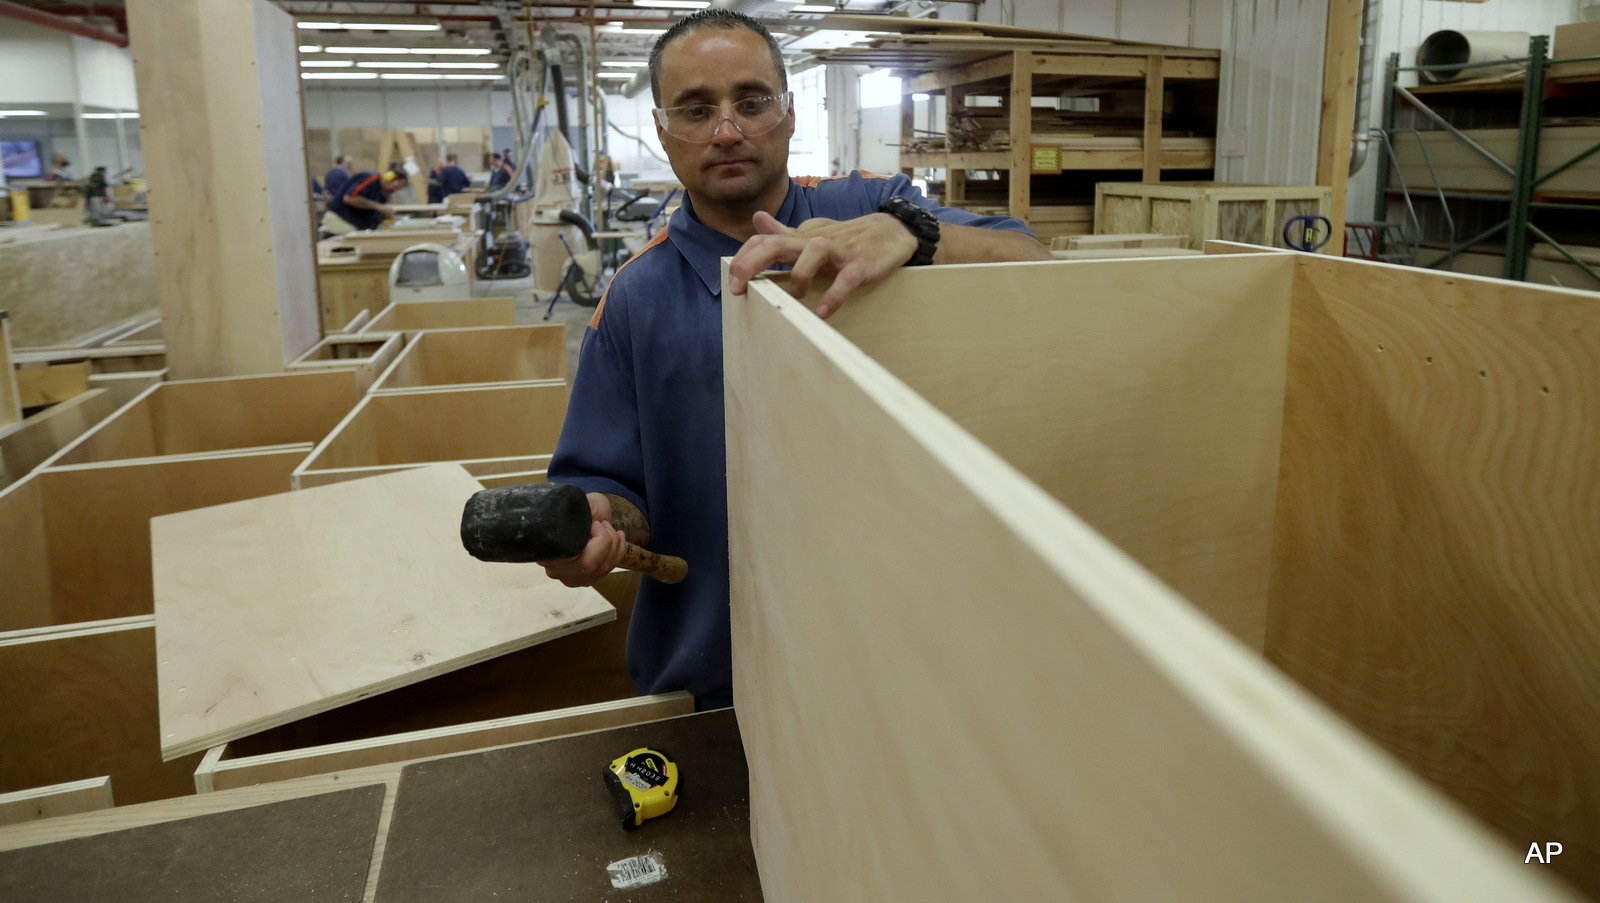 In a photo from Friday, July 8, 2016, inmate William Garrett works on a cabinet at the Habitat for Humanity Prison Build at the Ionia Correctional Facility in Ionia, Mich.